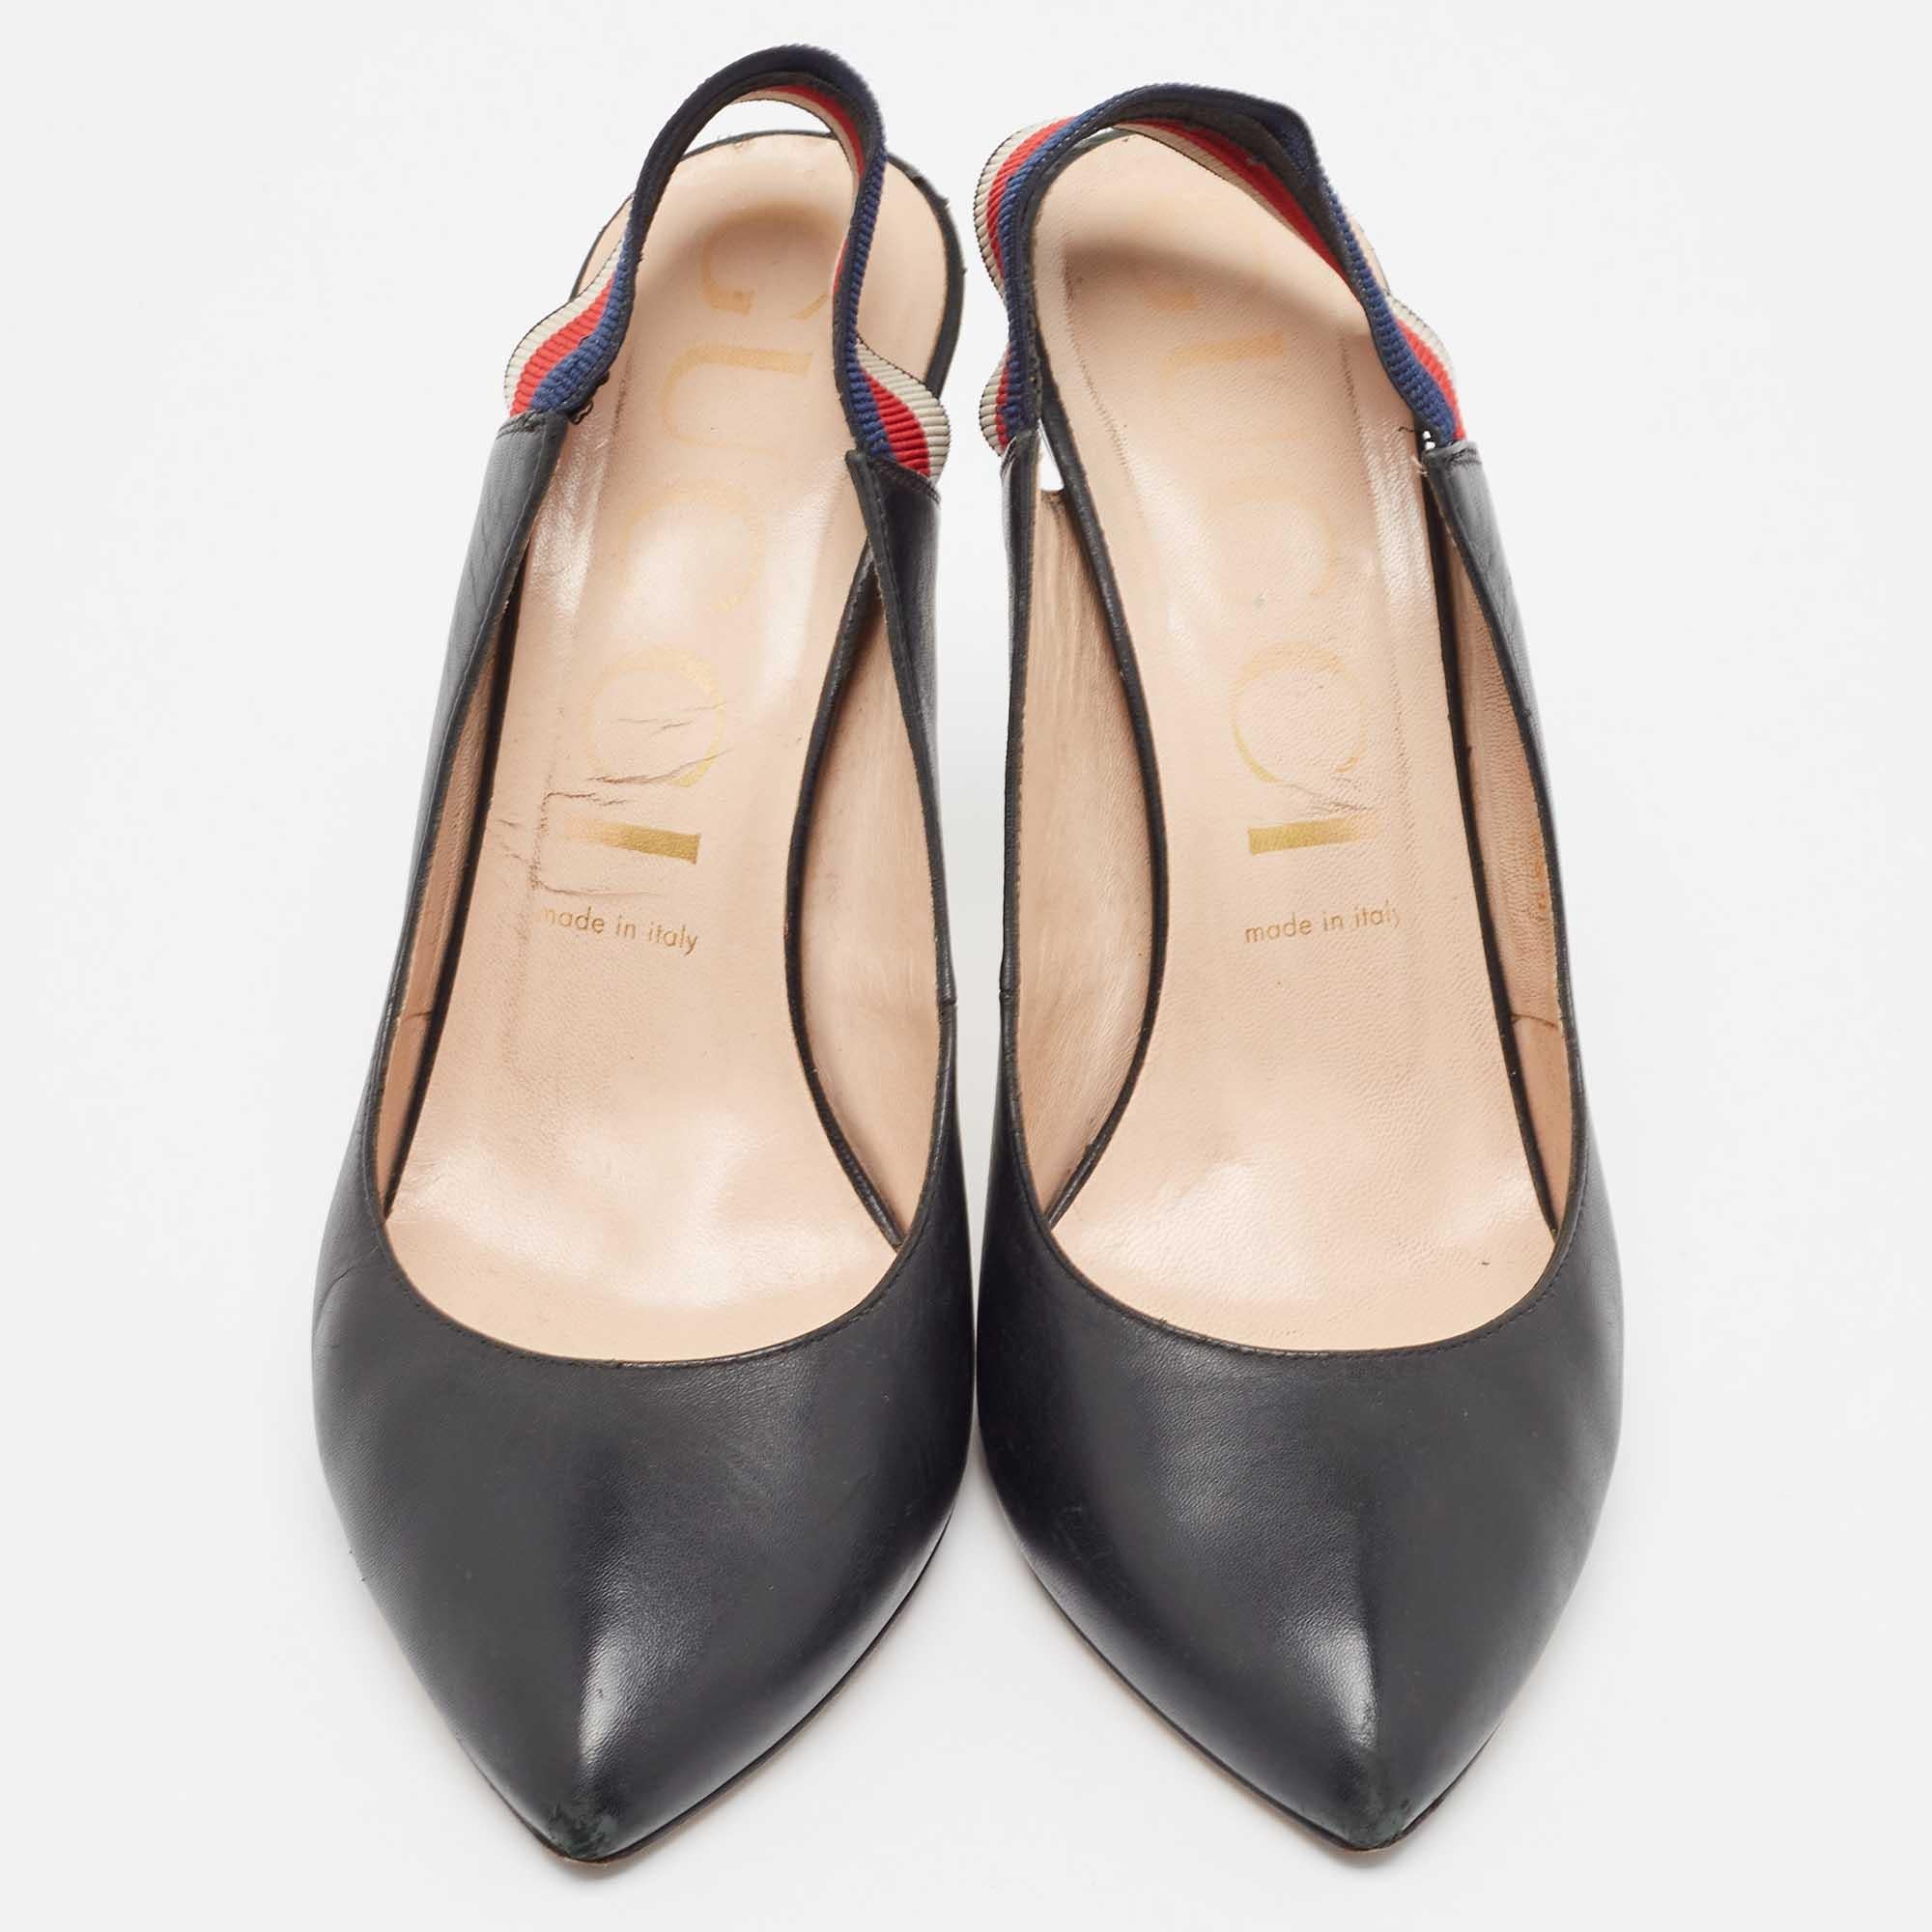 Exuding femininity and elegance, these pumps feature a chic silhouette with an attractive design. You can wear these pumps for a stylish look.

Includes: Original Dustbag, Original Box, Info Booklet

